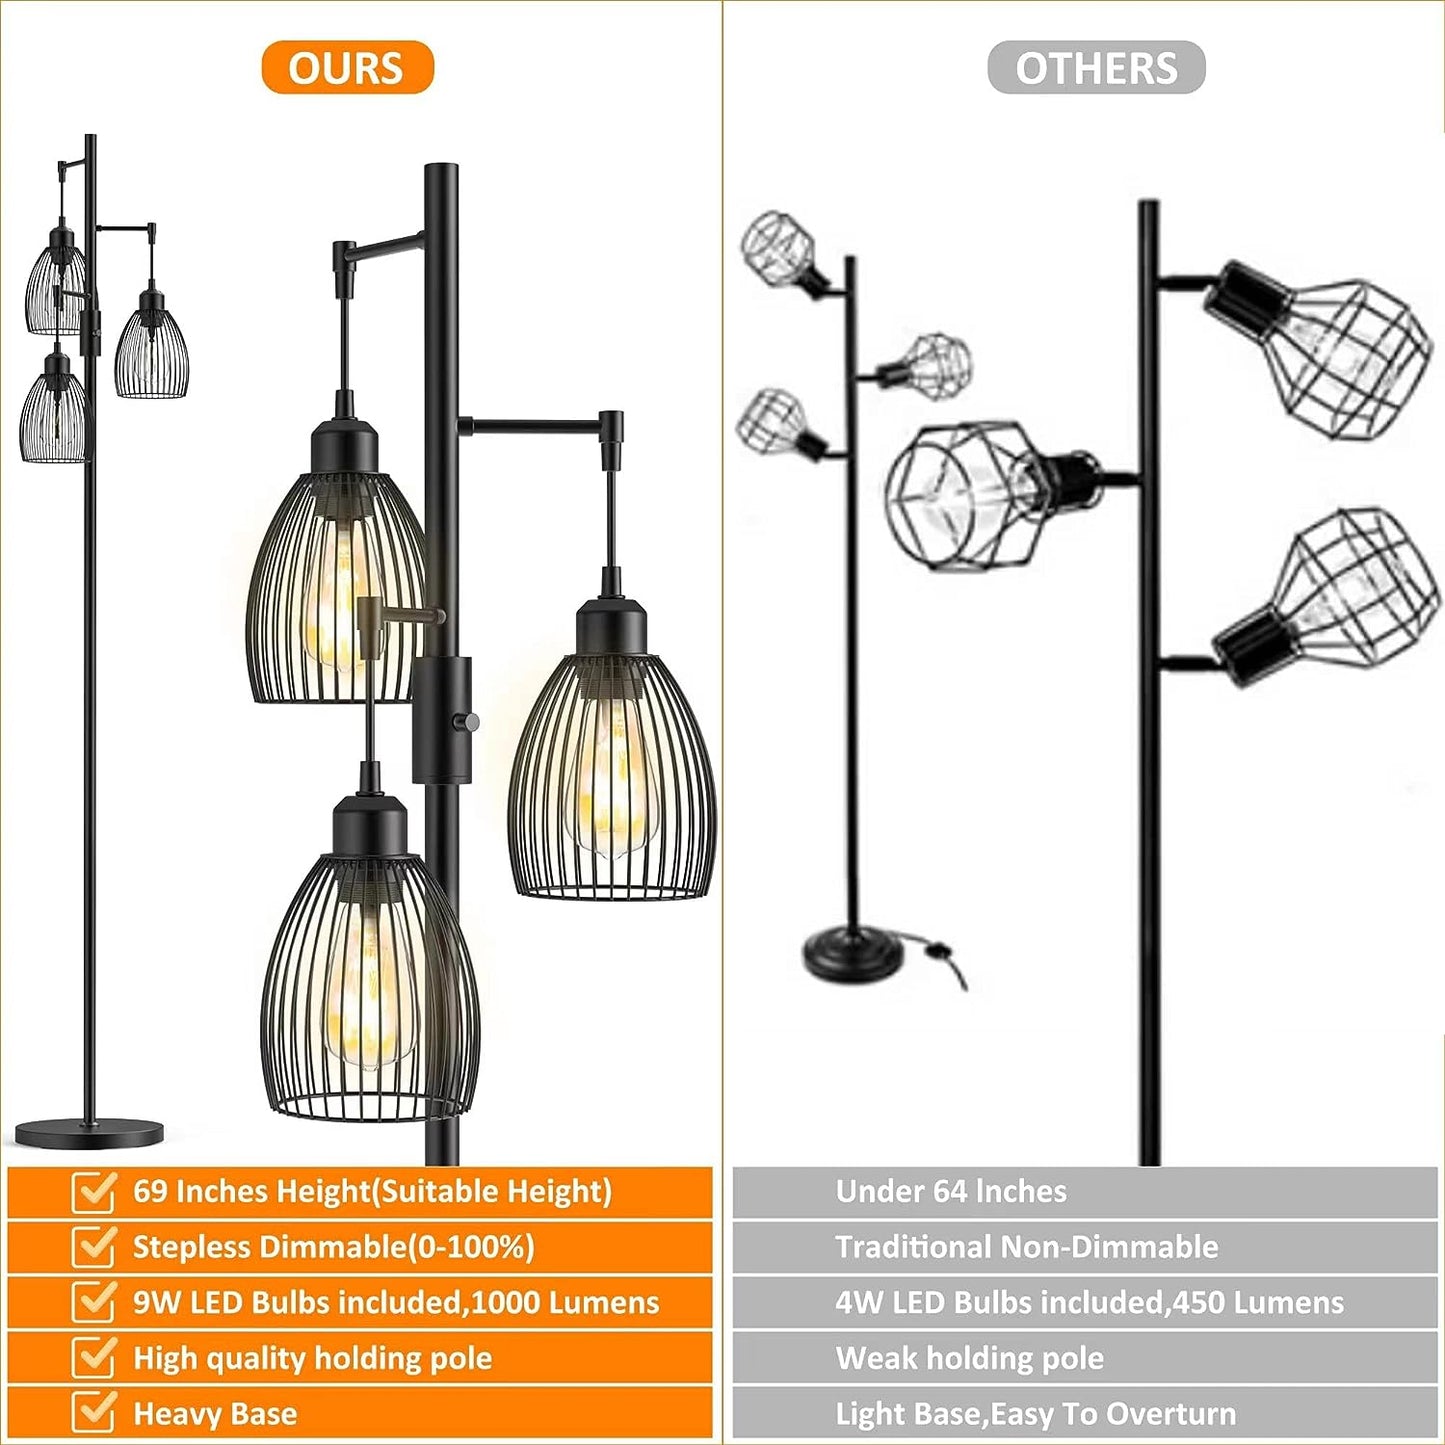 PAZZO 69 inch Three LED Metal Industrial Floor Lamp, Bright & Durable, with 3 Stepless Dimmable Bulb Included, Black